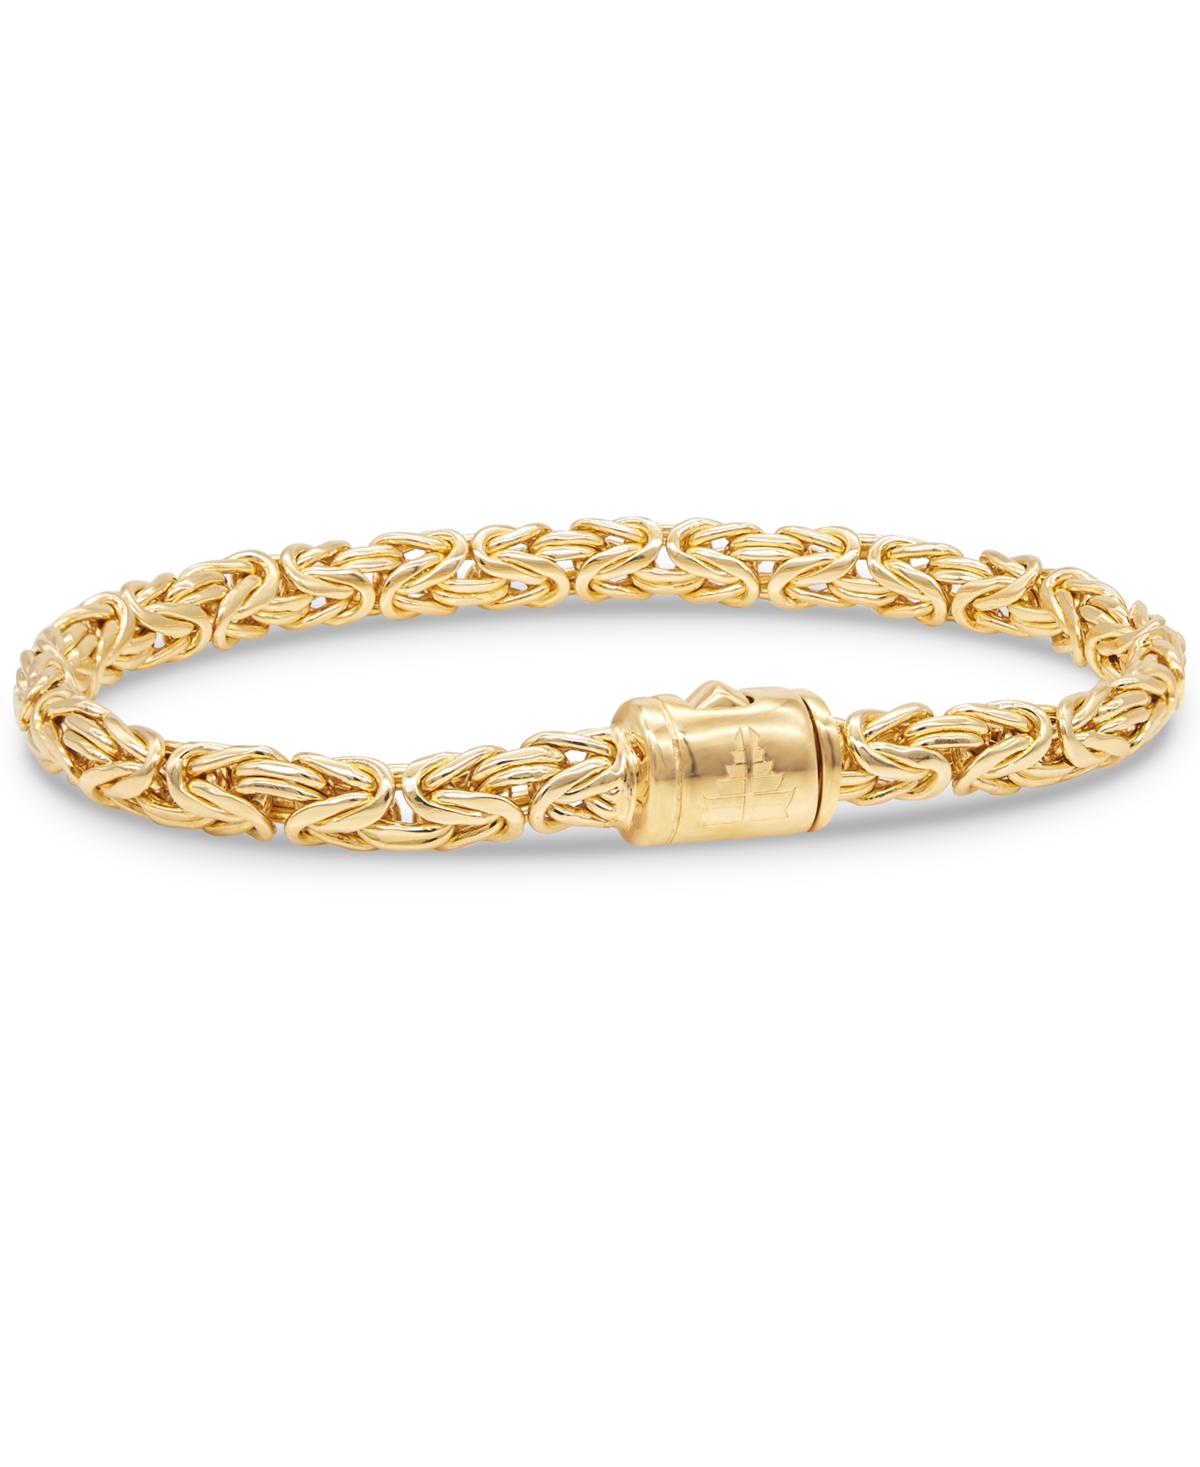 Gold Plated Borobudur Oval 6mm Chain Bracelet in Sterling Silver - Gold